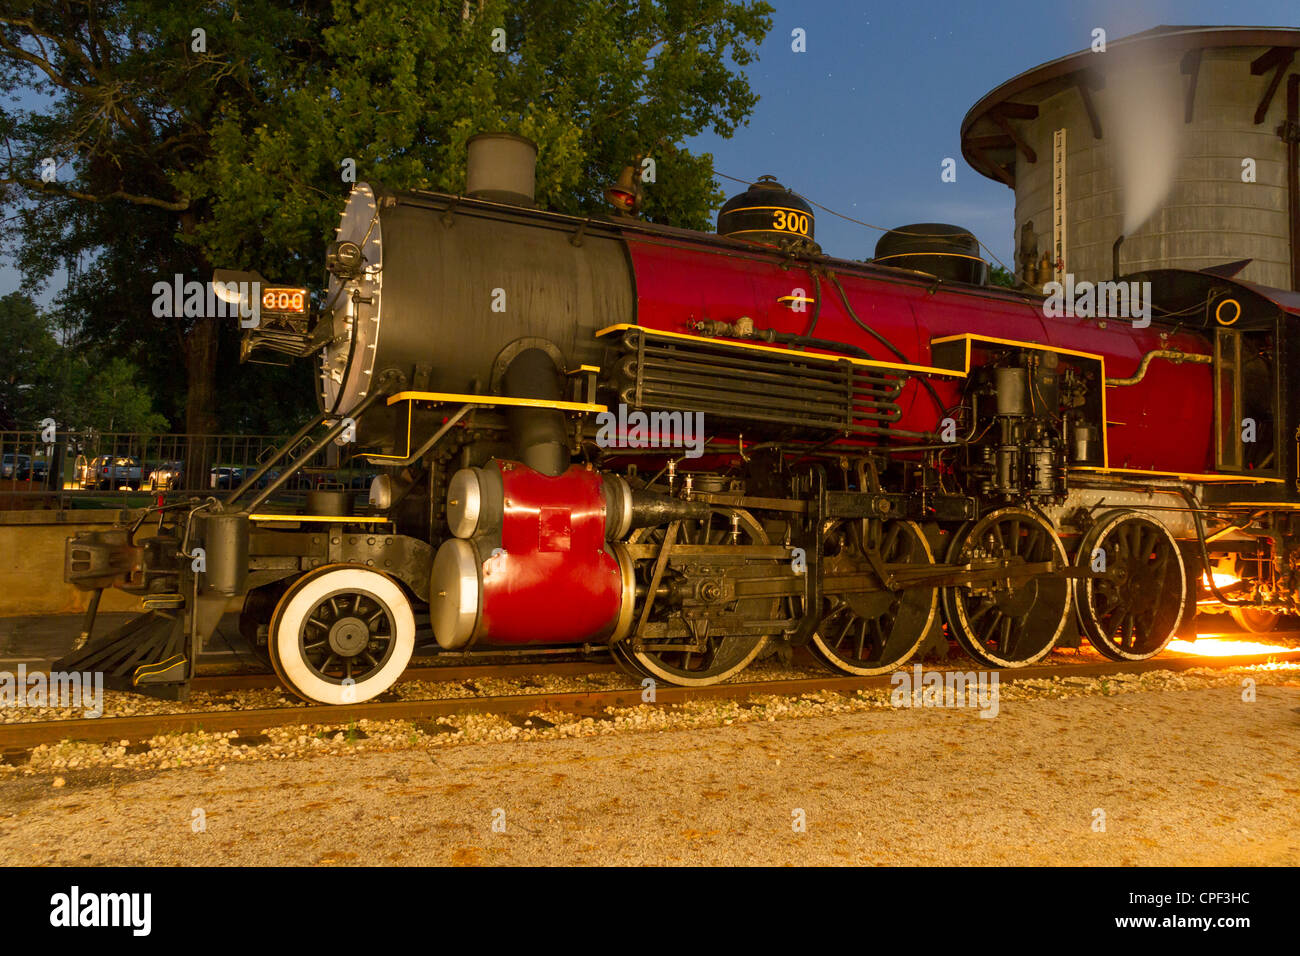 Night photo shoot with 1917 Baldwin 'Pershing' steam engine locomotive 300 at Rusk Depot of 'Texas State Railroad', Rusk, Texas. Stock Photo